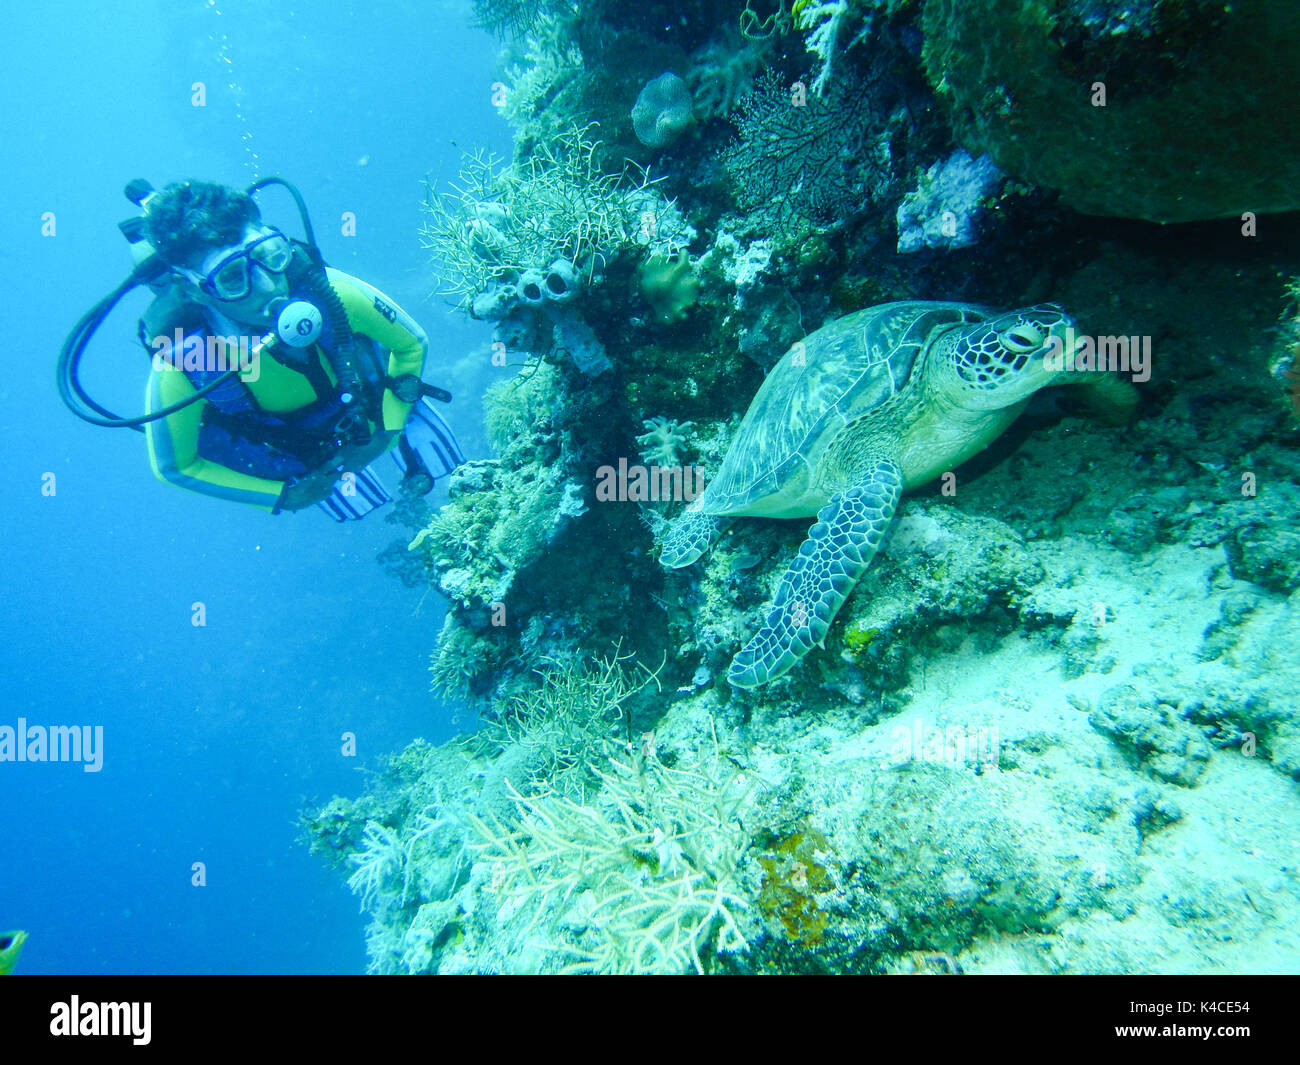 Female Diver Observing Resting Seaturtle In Coral Reef Stock Photo